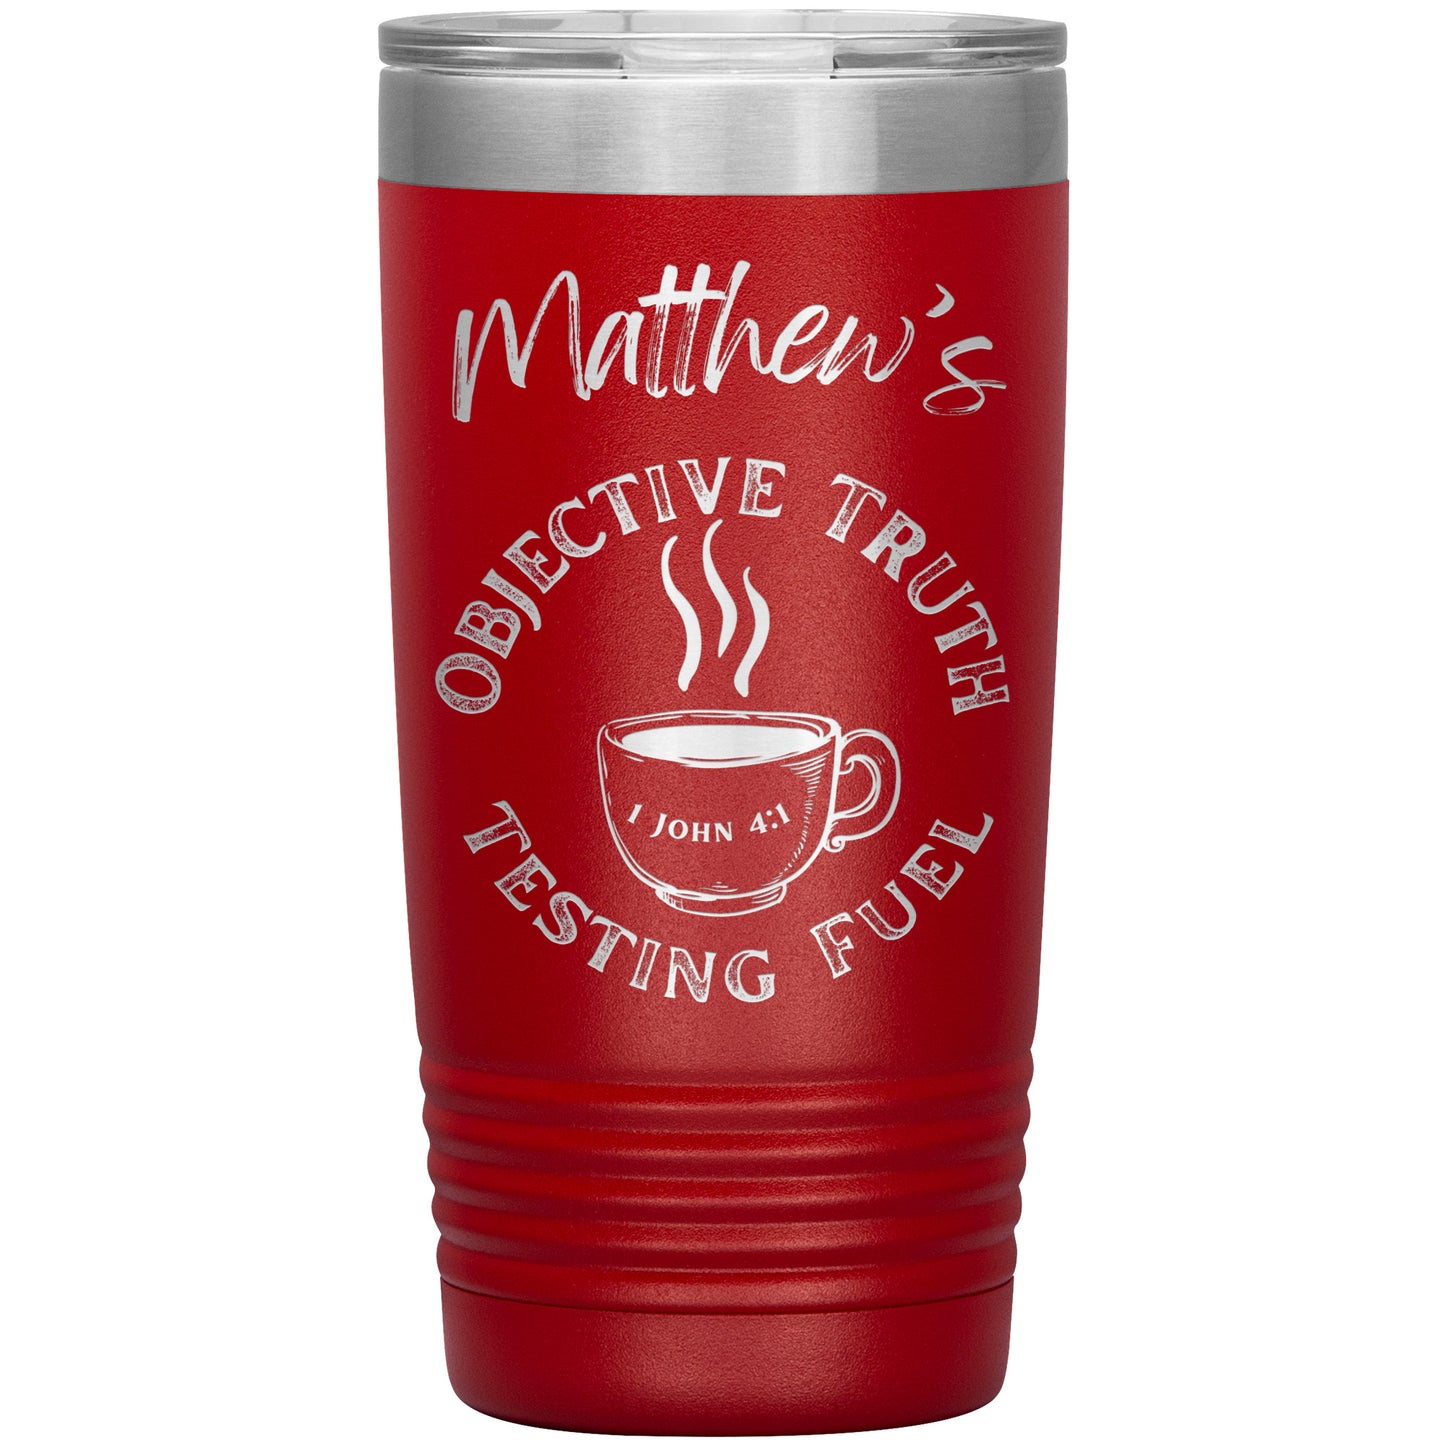 Objective Truth Testing Fuel Tumbler 20oz